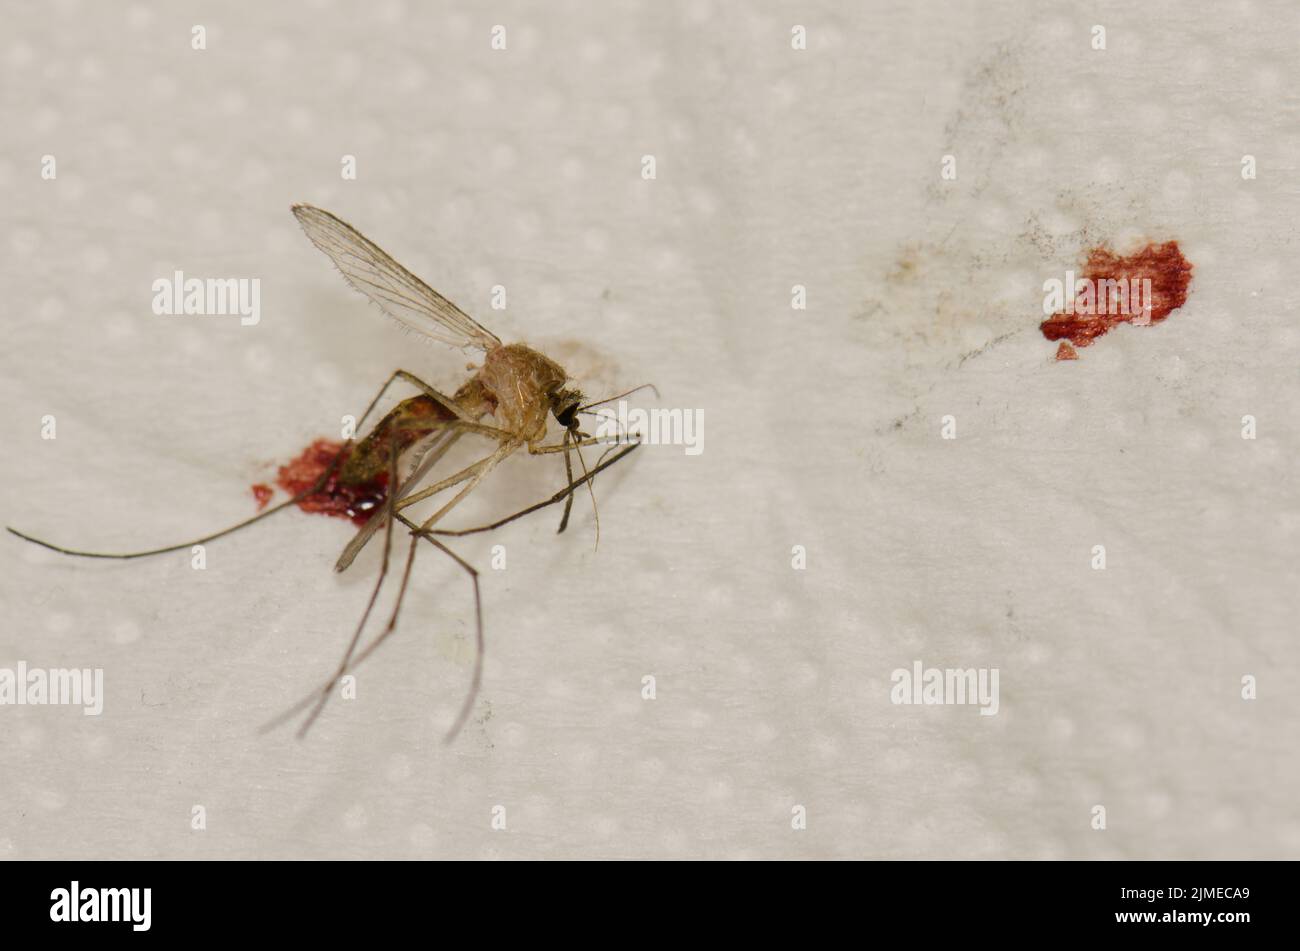 Crushed common house mosquito Culex pipiens after feeding on a person's blood. Las Palmas de Gran Canaria. Gran Canaria. Canary Islands. Spain. Stock Photo